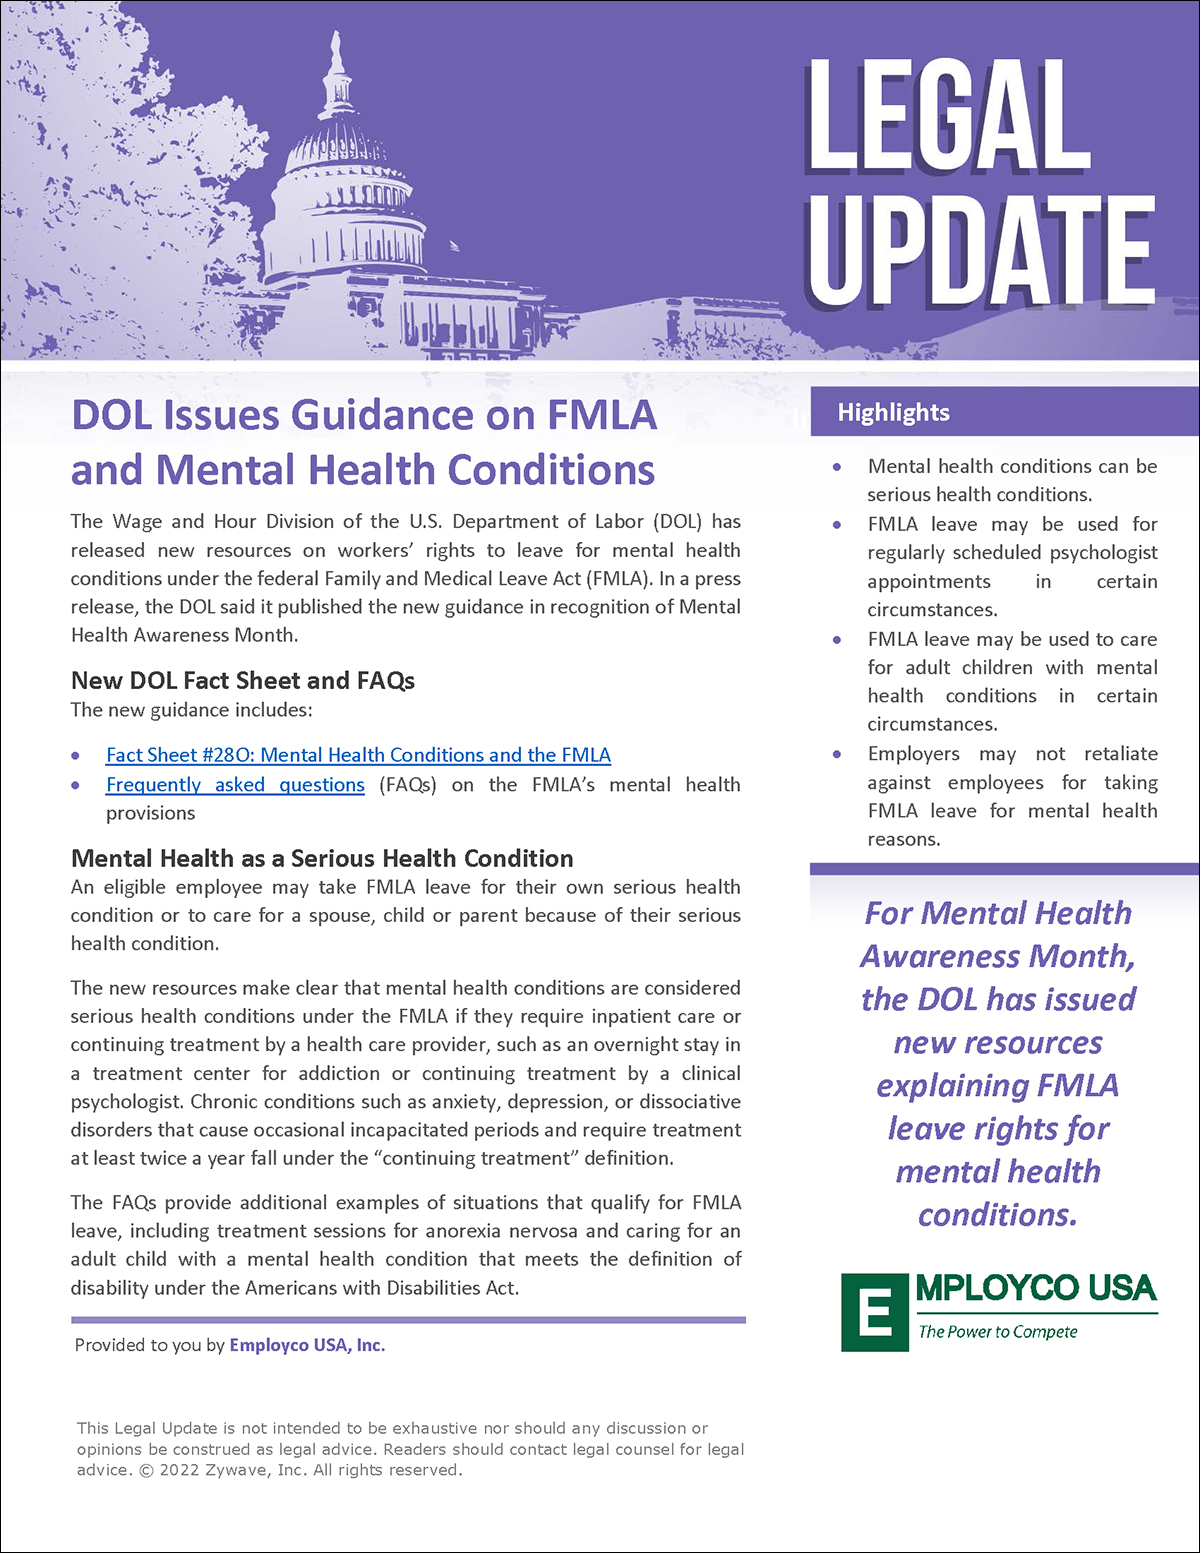 DOL Issues Guidance on FMLA and Mental Health Conditions